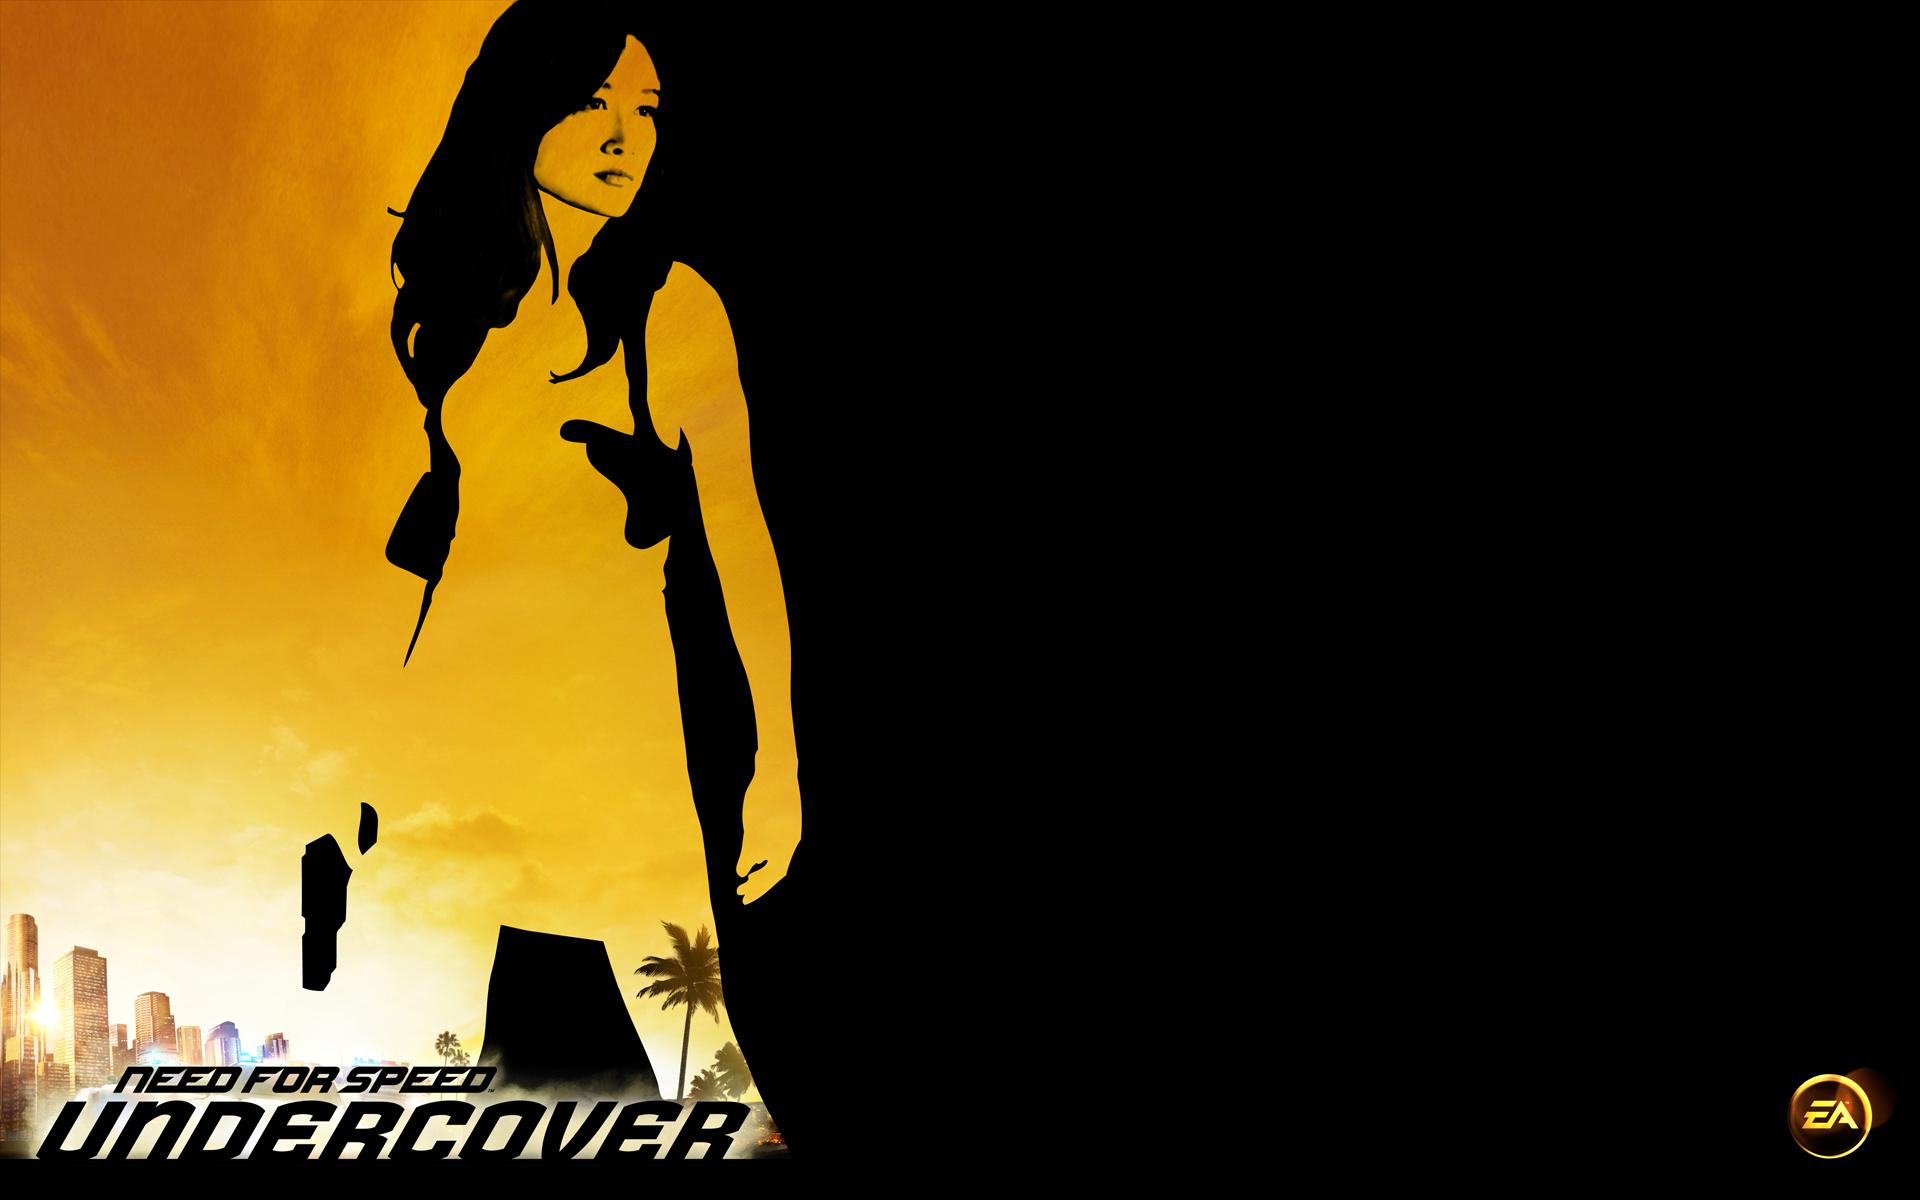 Need for Speed: Undercover Wallpapers » nfs_wallpaper_3